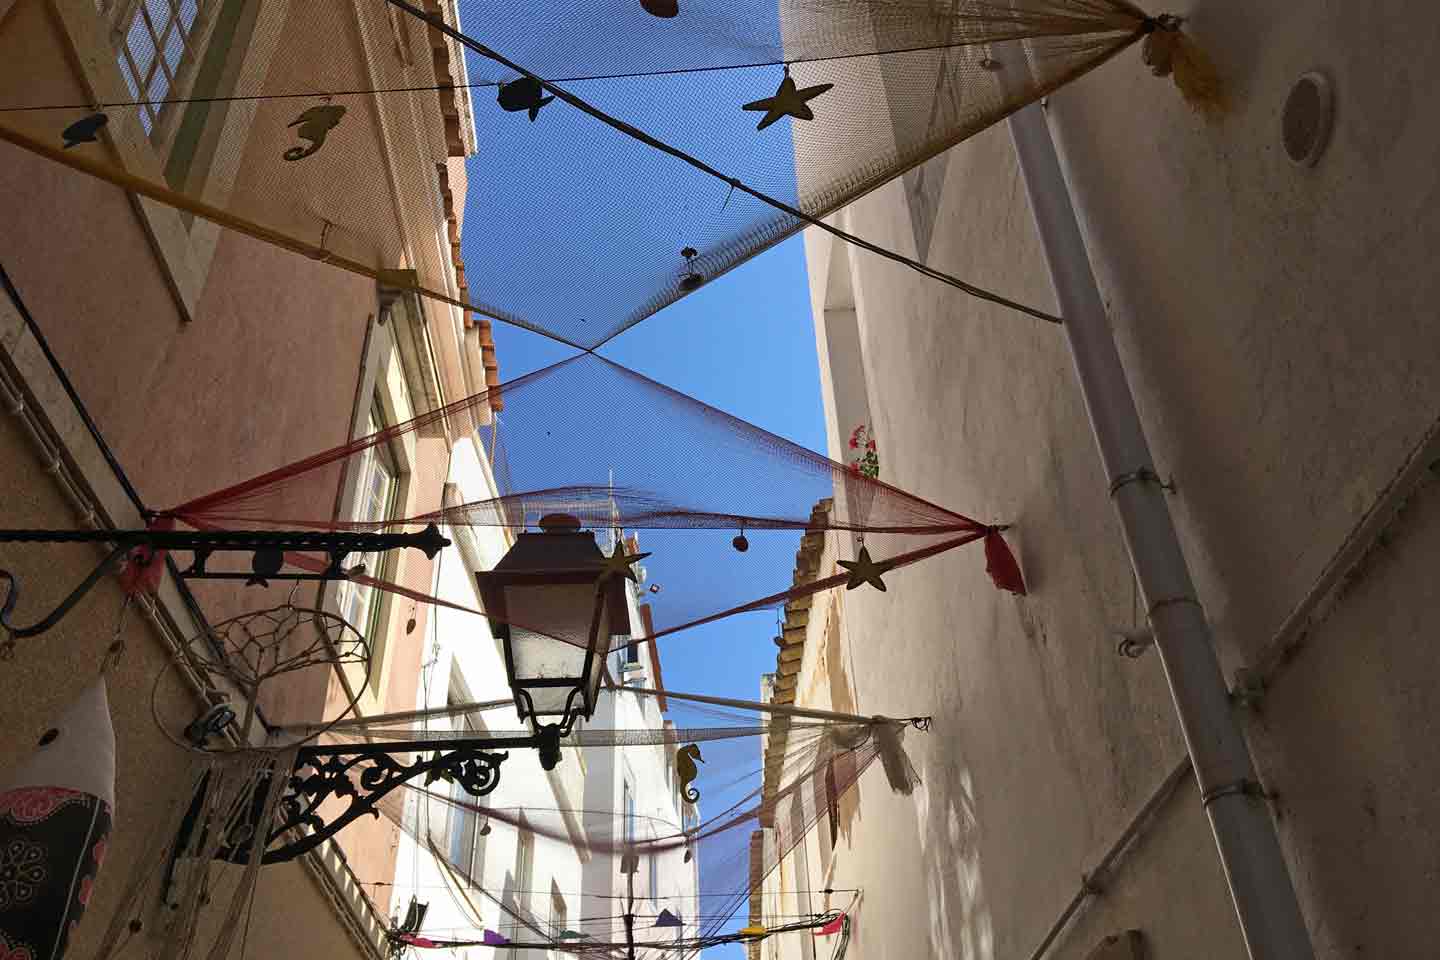 A photo of street decorations across an alleyway in Olhao